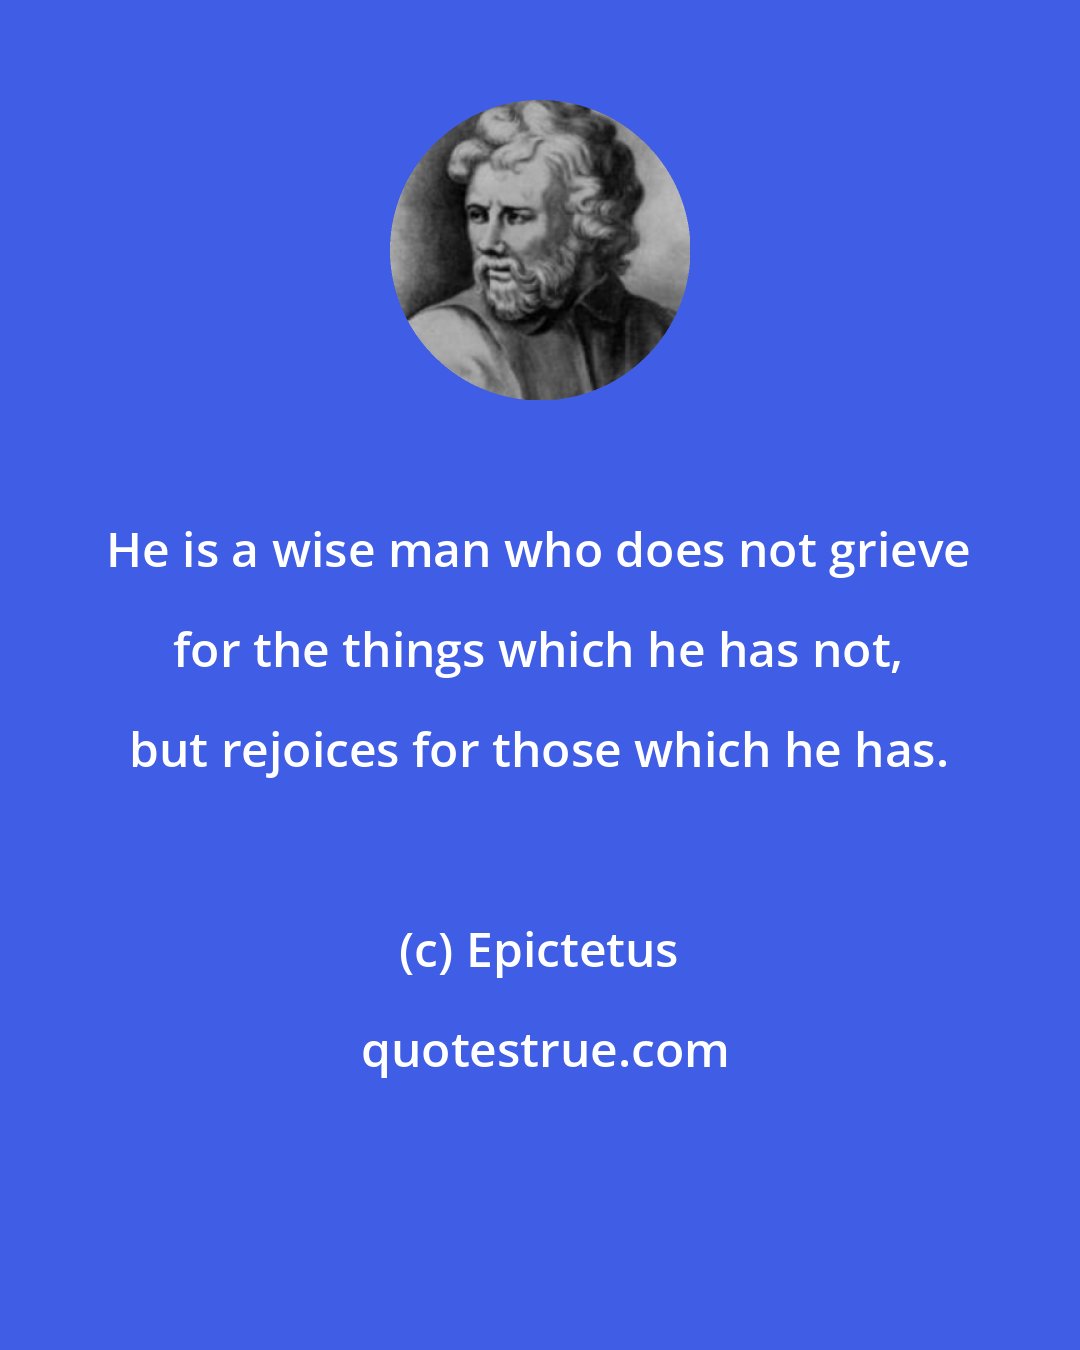 Epictetus: He is a wise man who does not grieve for the things which he has not, but rejoices for those which he has.